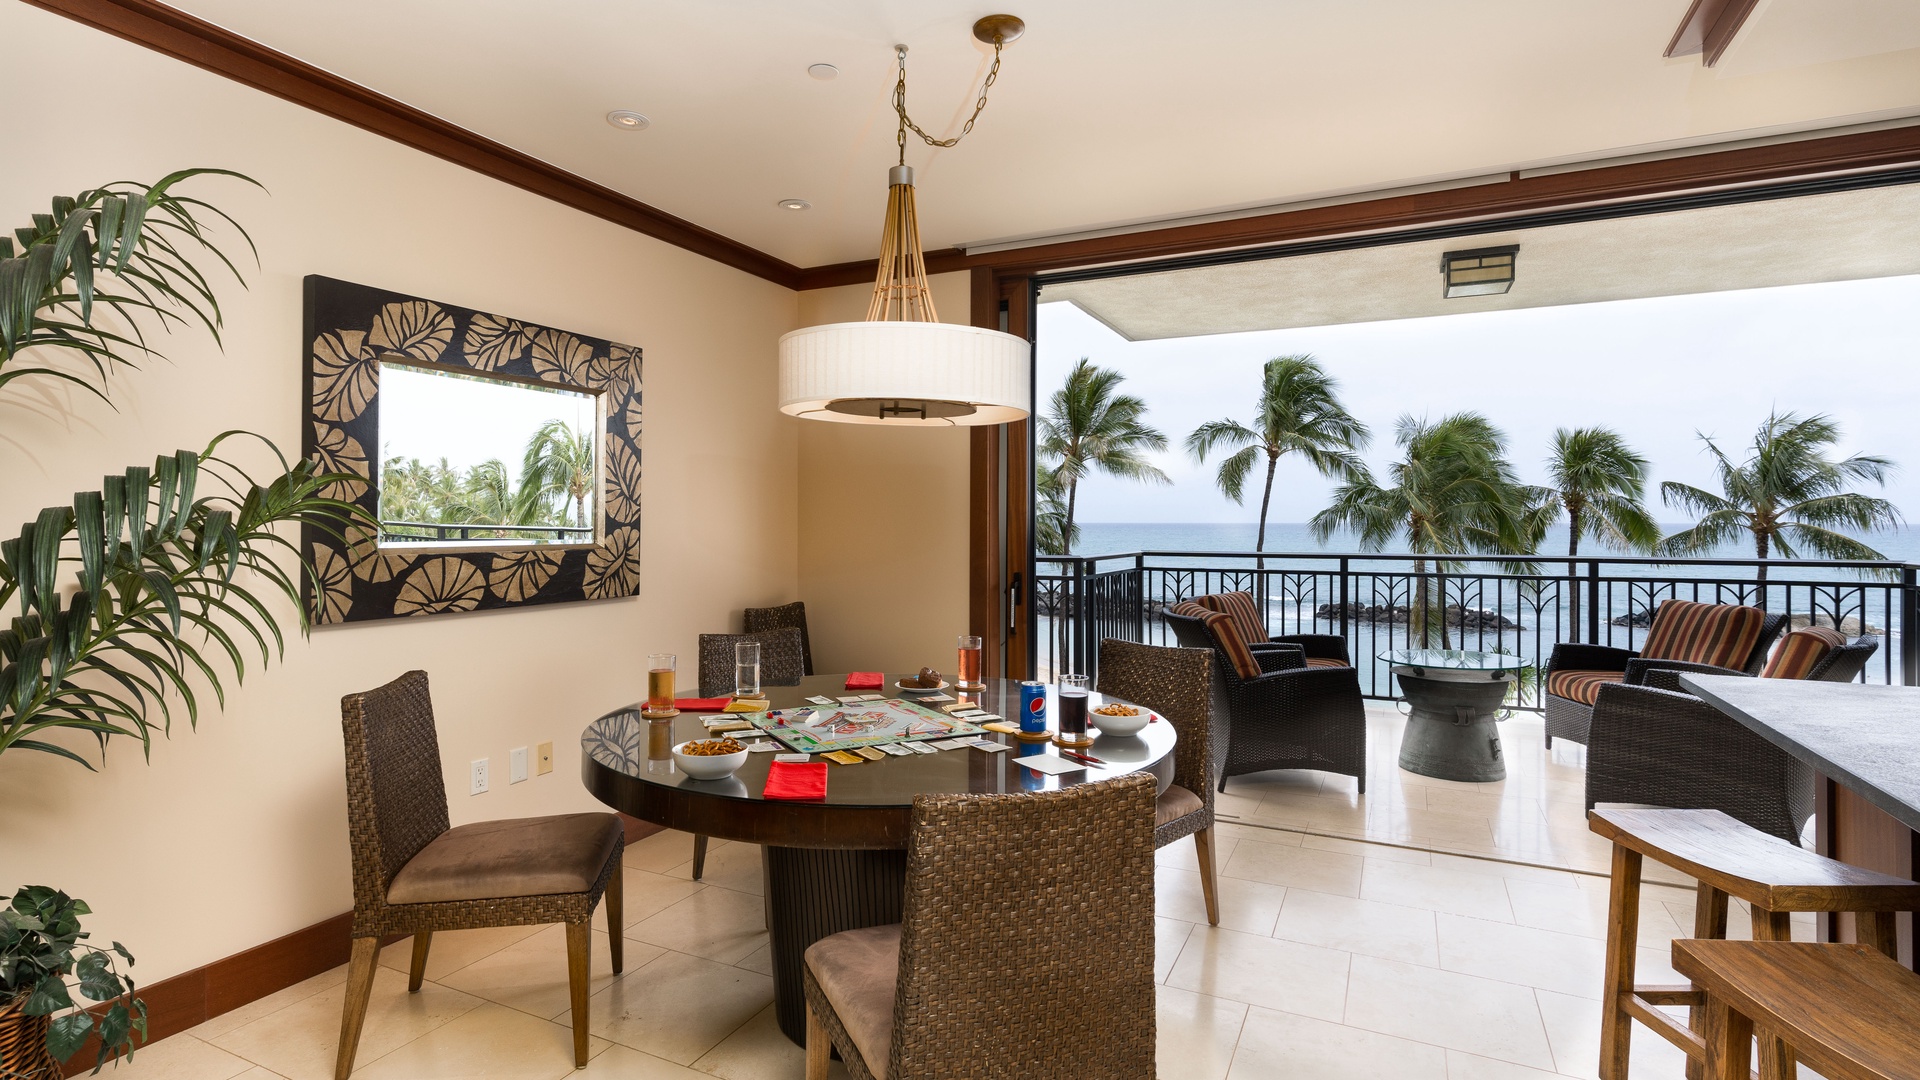 Kapolei Vacation Rentals, Ko Olina Beach Villas B310 - The most incredible dining scenery from the condo.